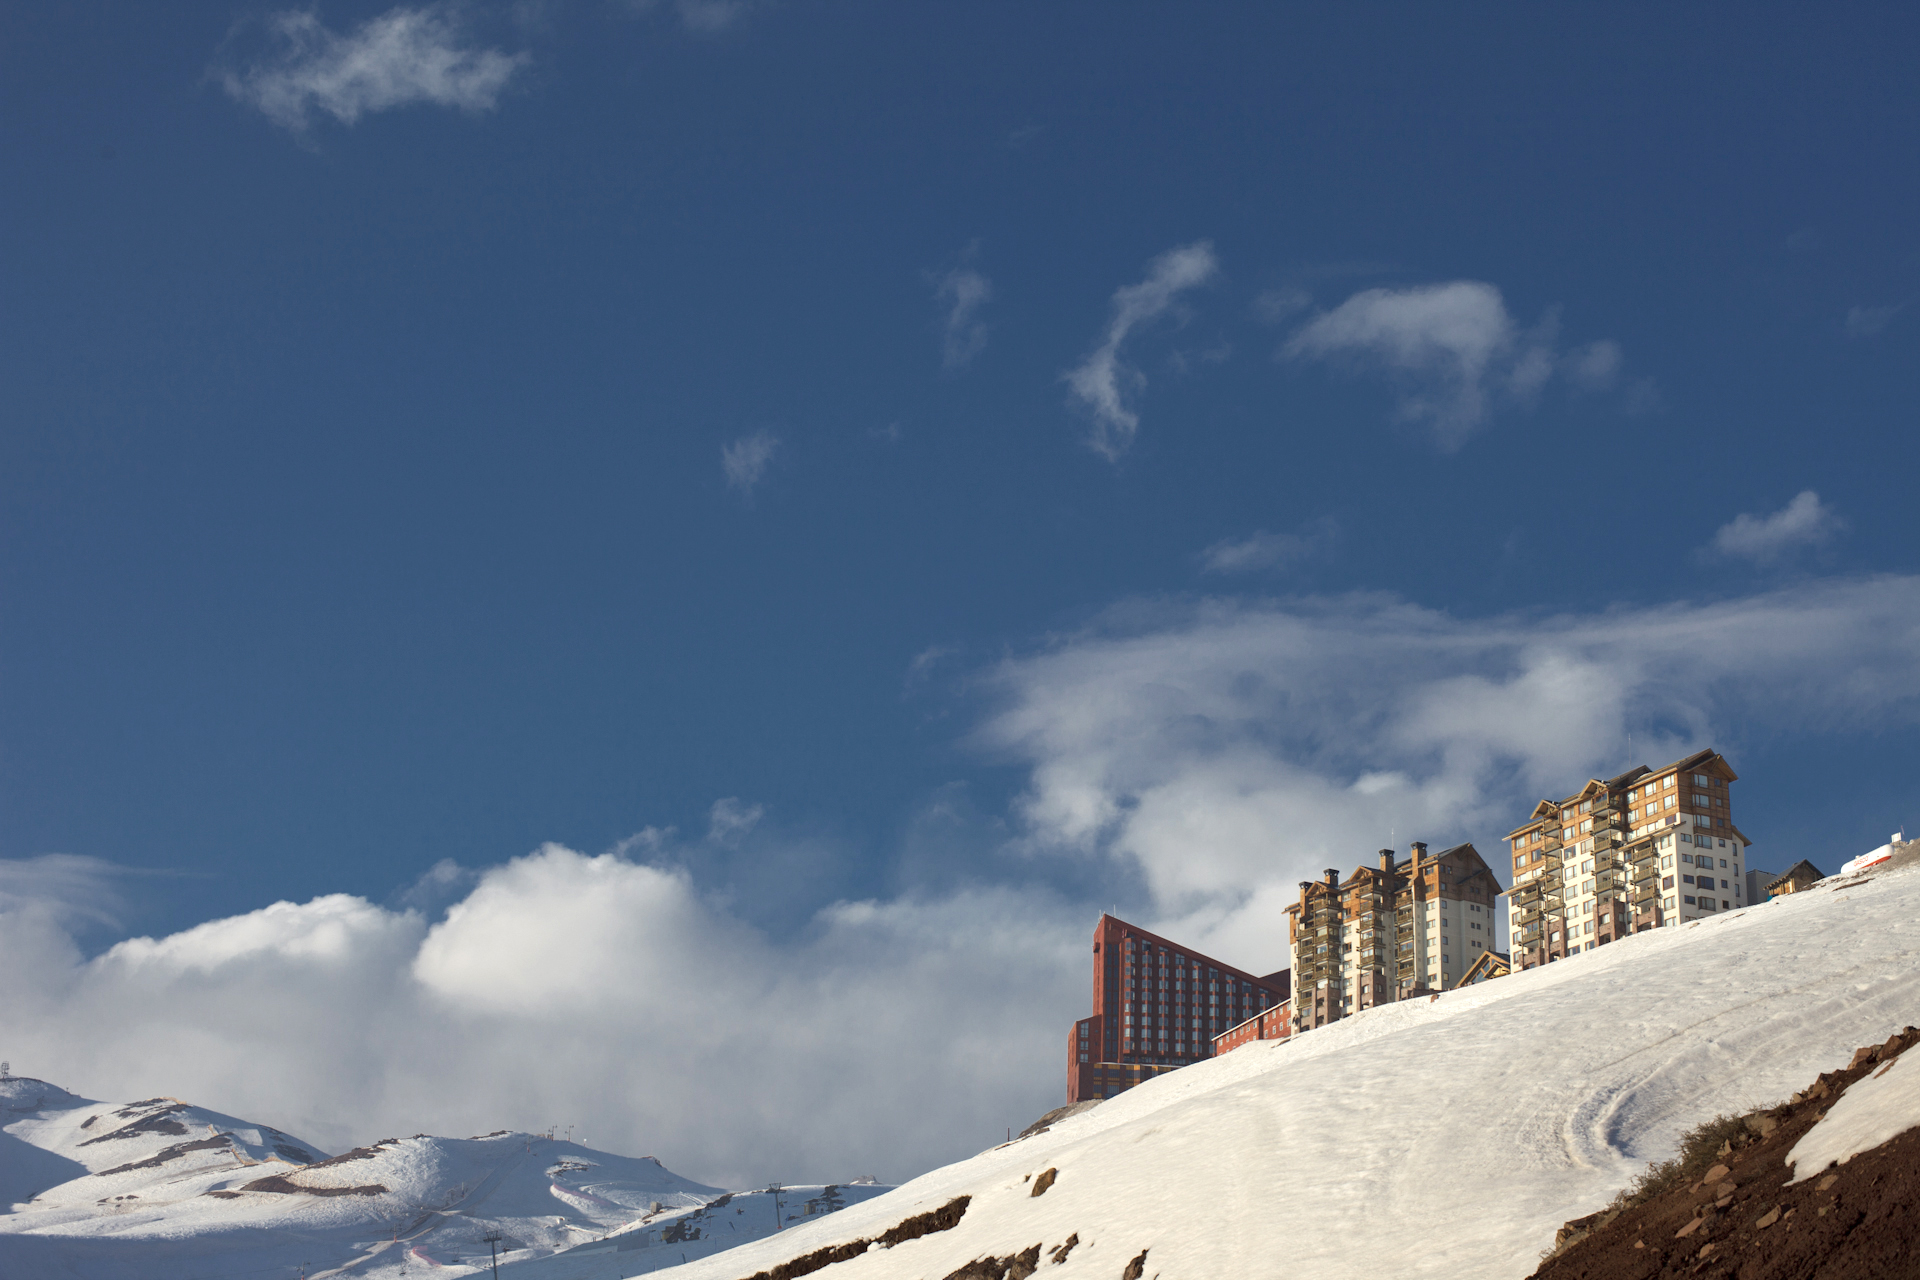 View of Valle Nevado. Photo by Jimmy Baikovicius.